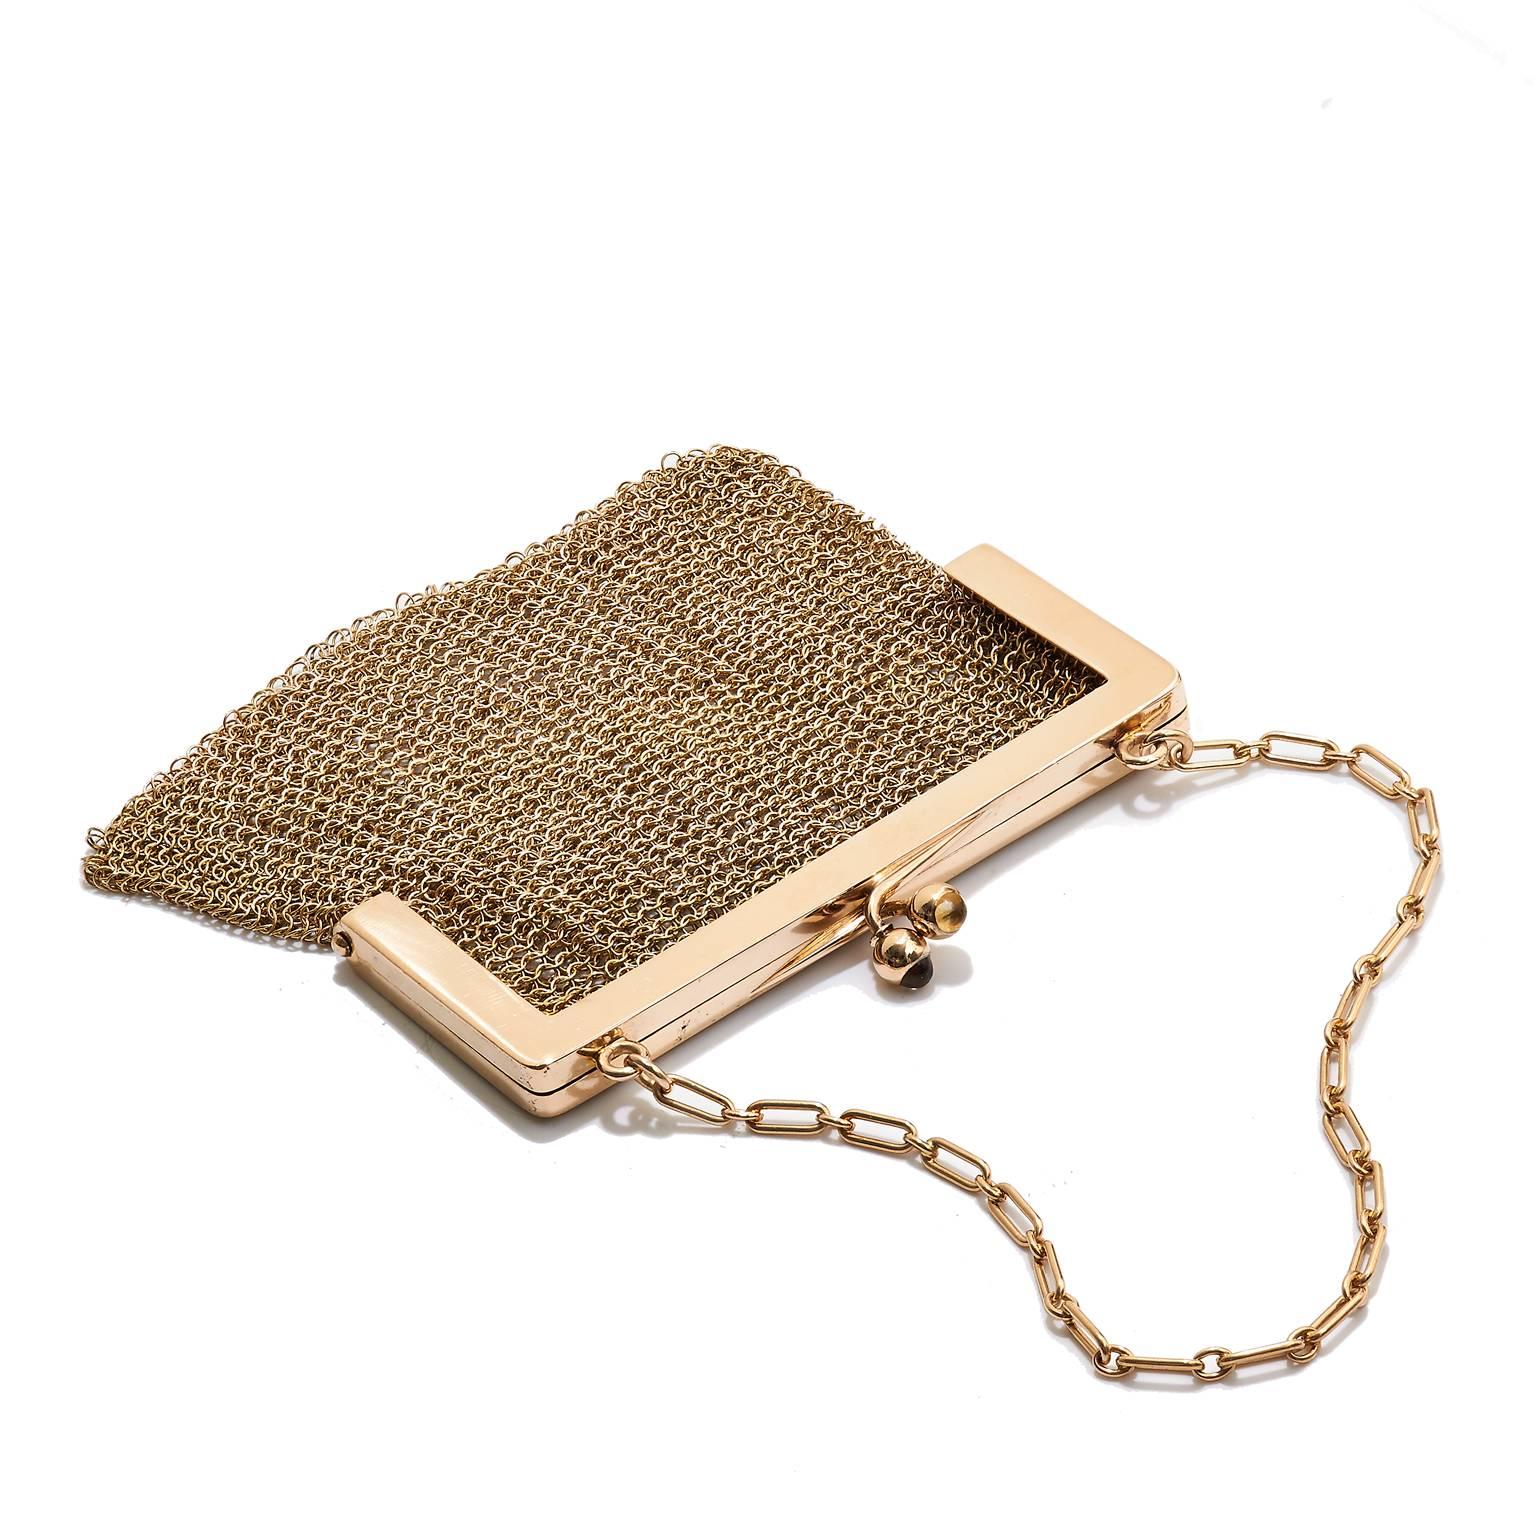 History and memories are kept alive with this very special collection piece.  Crafted in 14kt yellow gold, this coin purse was made in the late 1800’s and captures the ornate style of accessories during the Victorian era.